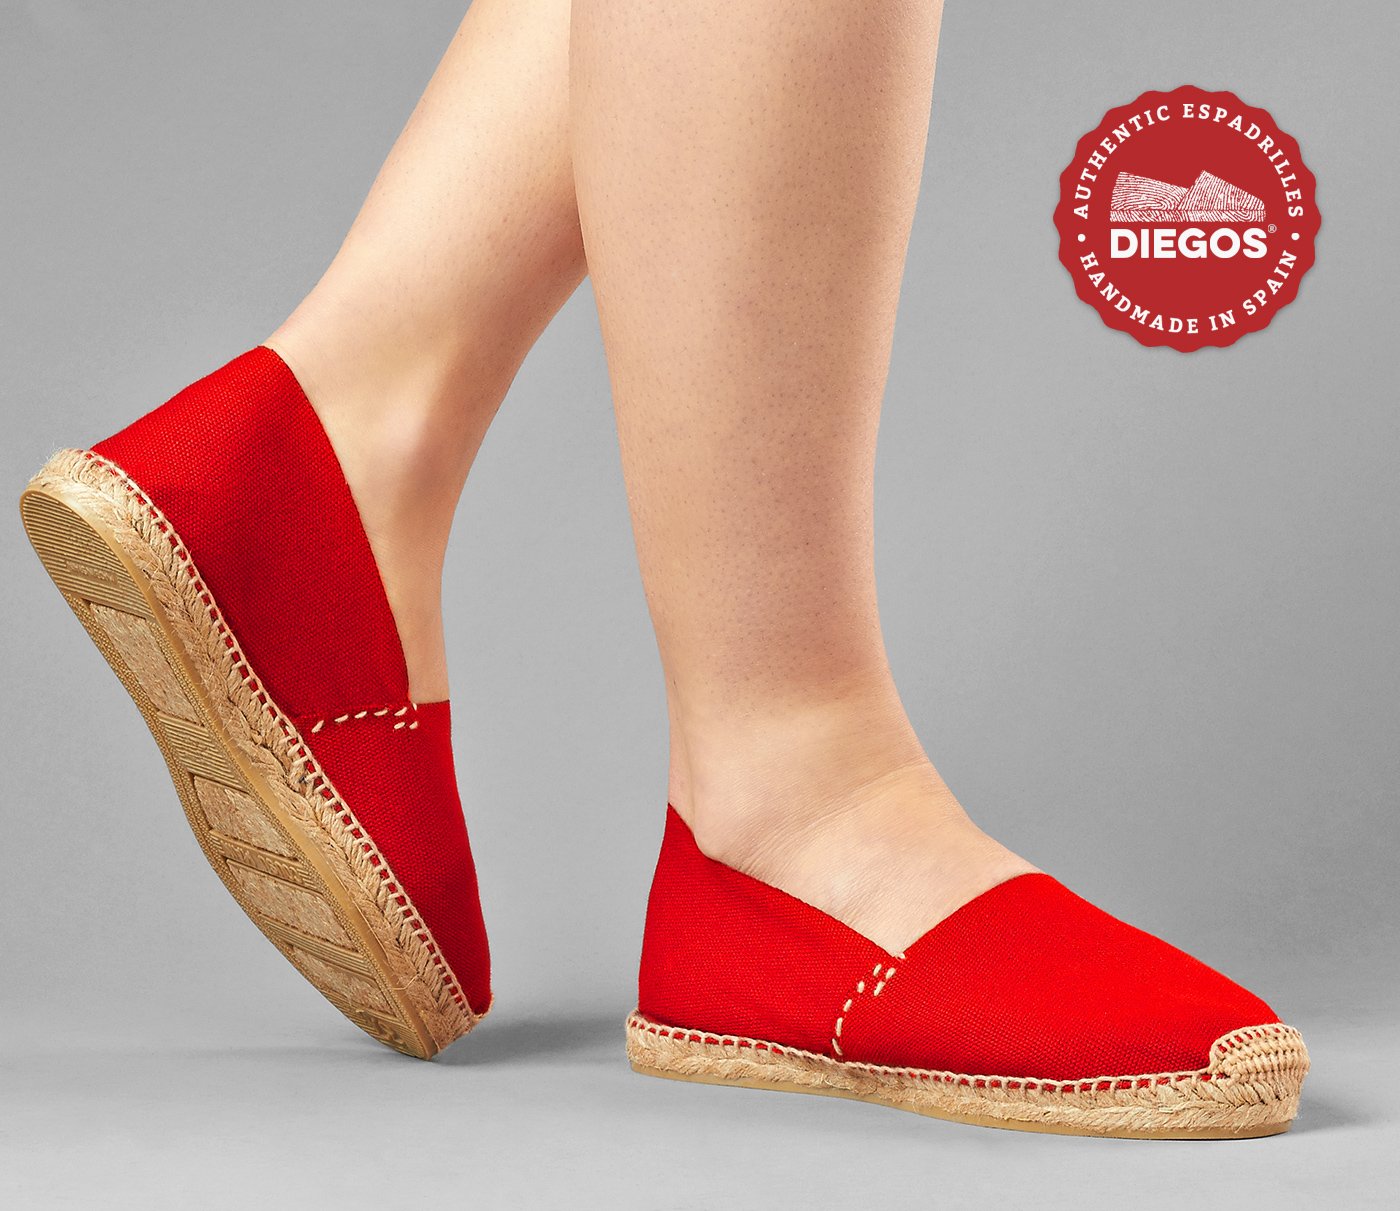 The and only classic flat espadrille from Spain and France diegos.com